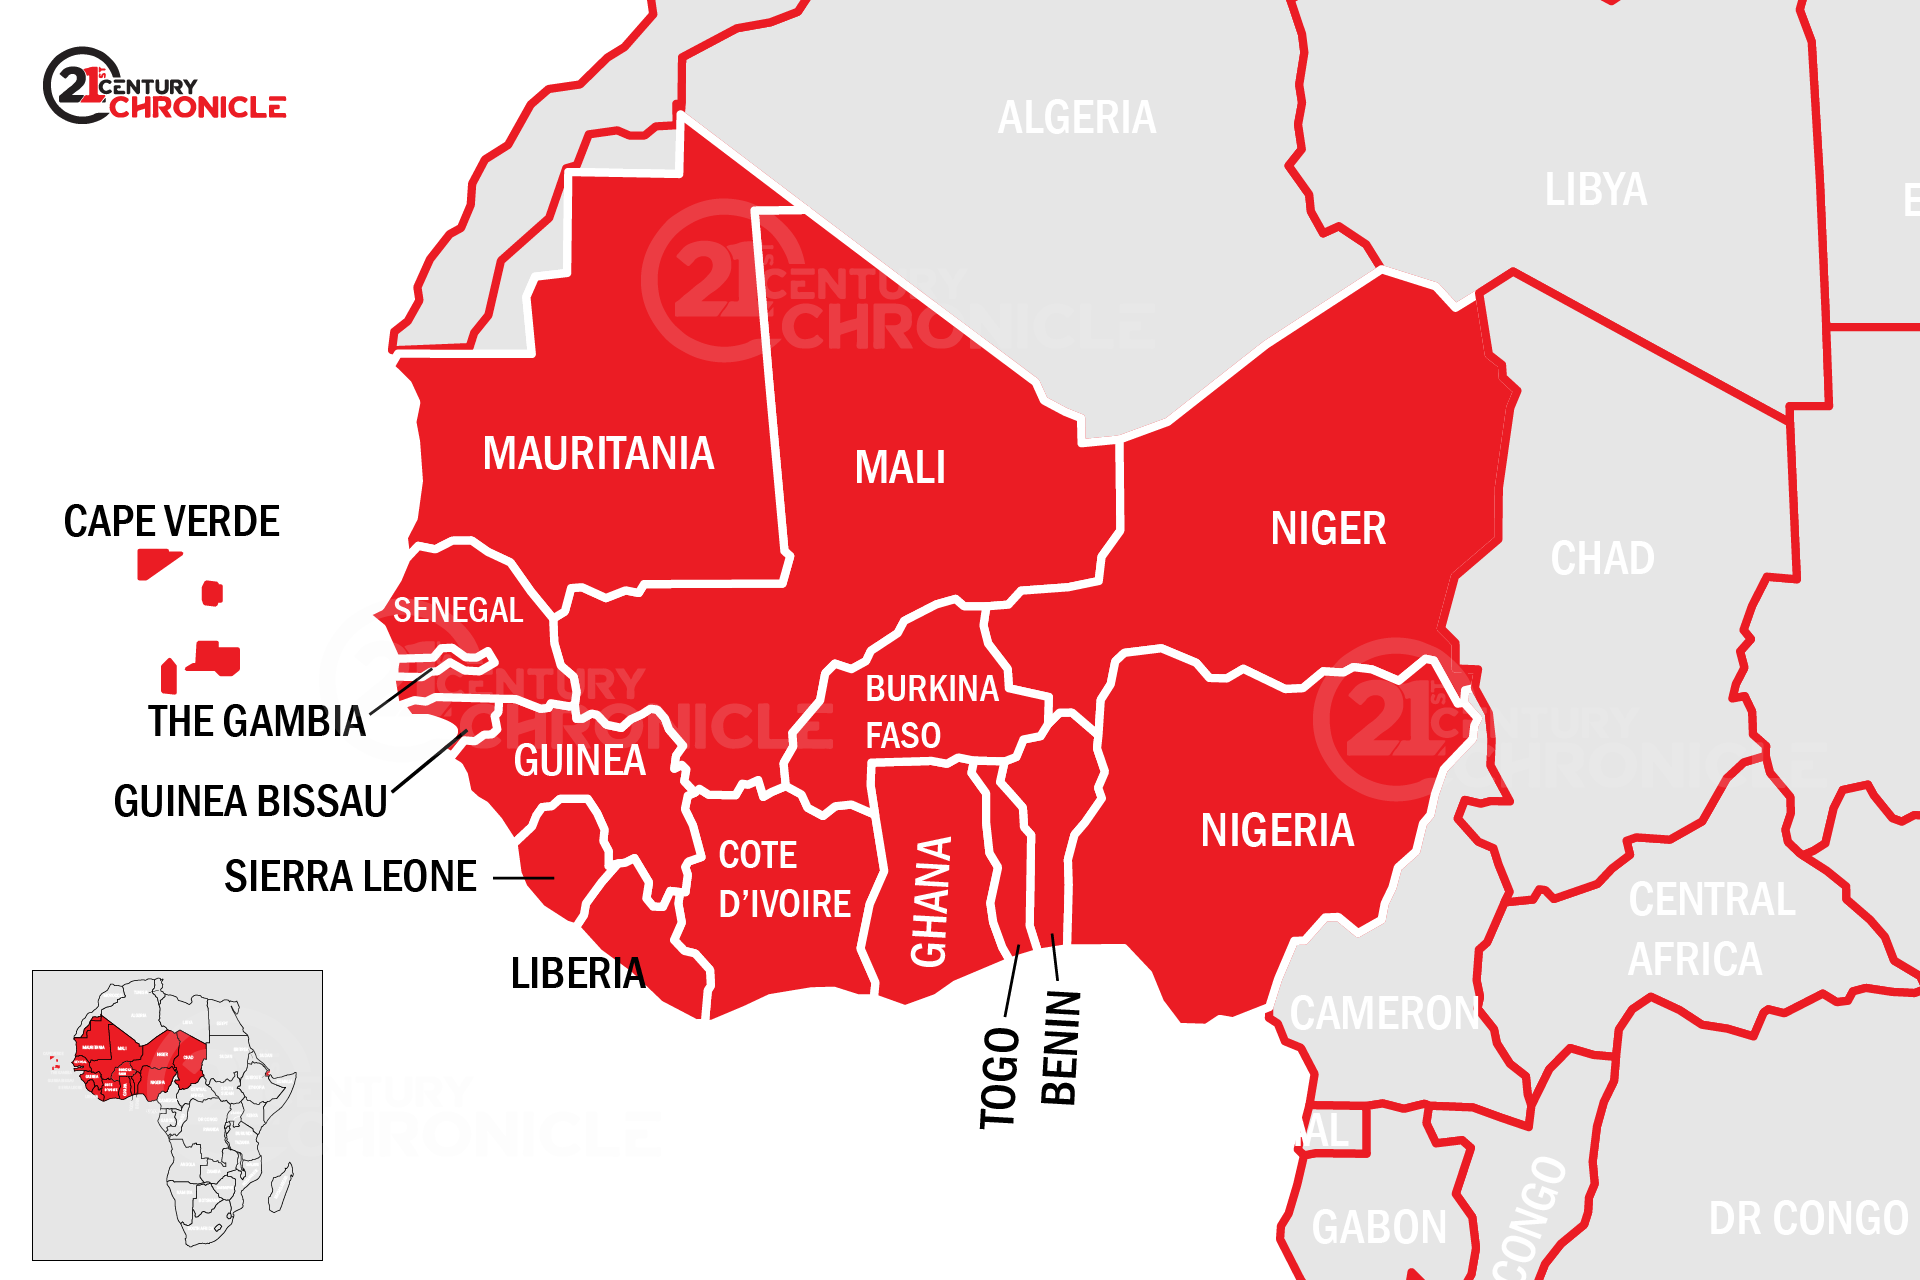 West African leaders meet over Niger coup, junta warns against intervention  - 21st CENTURY CHRONICLE